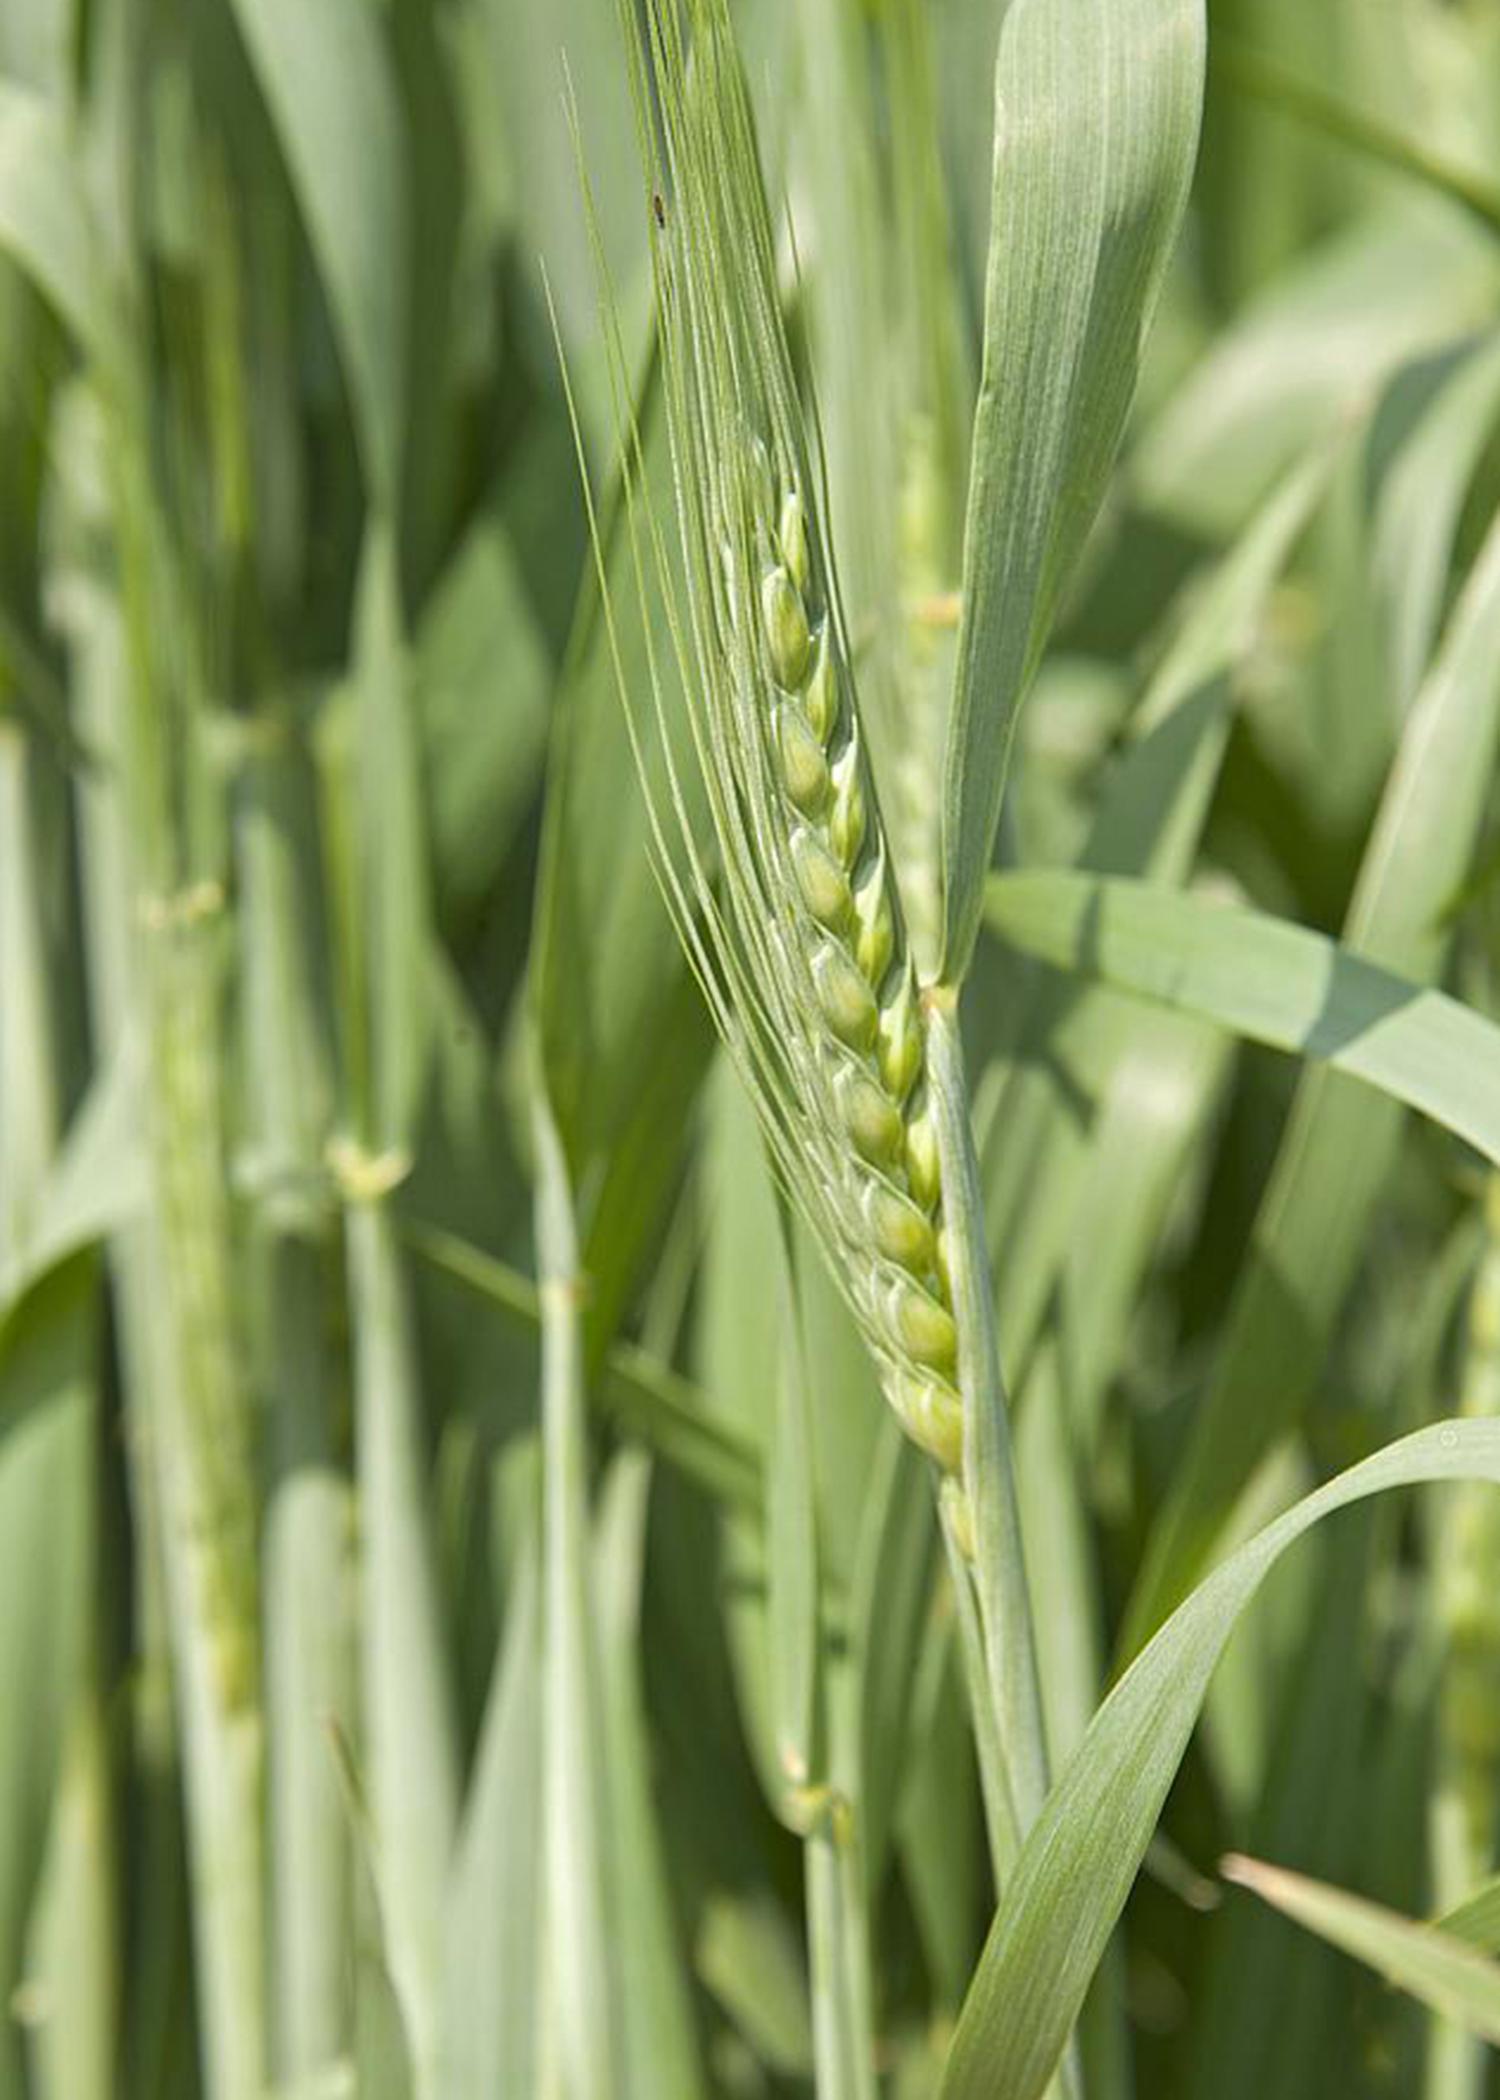 Some producers of winter wheat, such as this wheat grown during the 2013-2014 season at the Mississippi State University R.R. Foil Plant Science Research Center, are eligible for a Supplemental Coverage Option in addition to their crop insurance policies. (File Photo by MSU Ag Communications/Kat Lawrence)